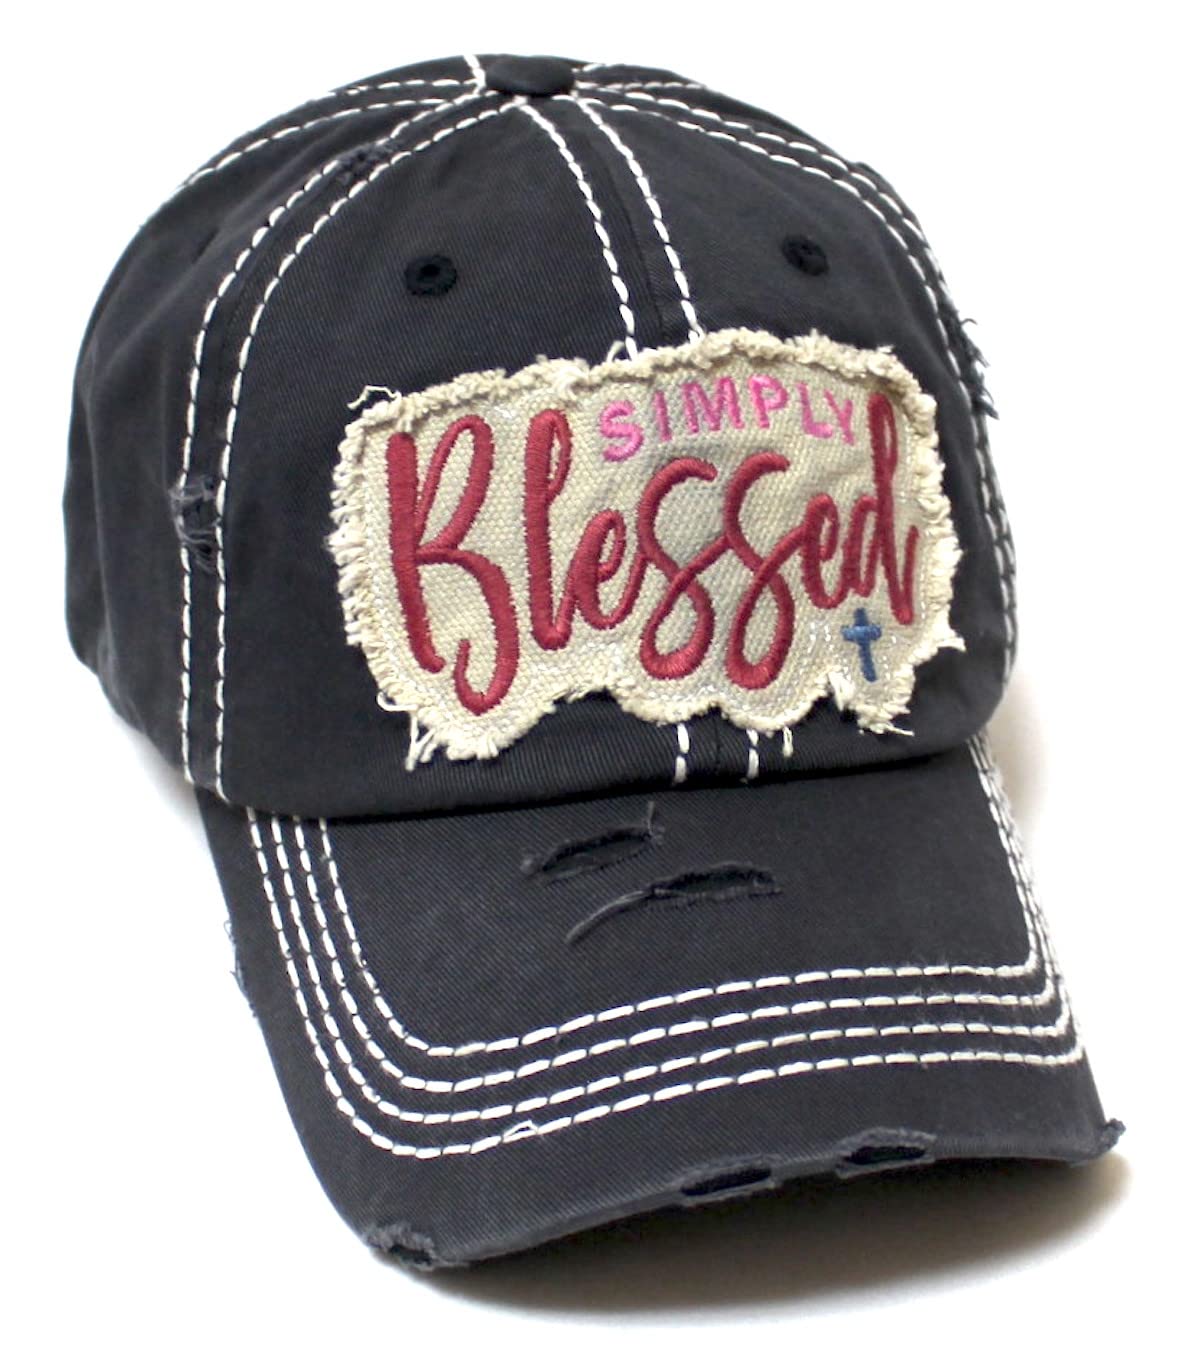 Unisex Monogram Cap Simply Blessed Cross, Faith Themed Patch Embroidery Distressed Hat